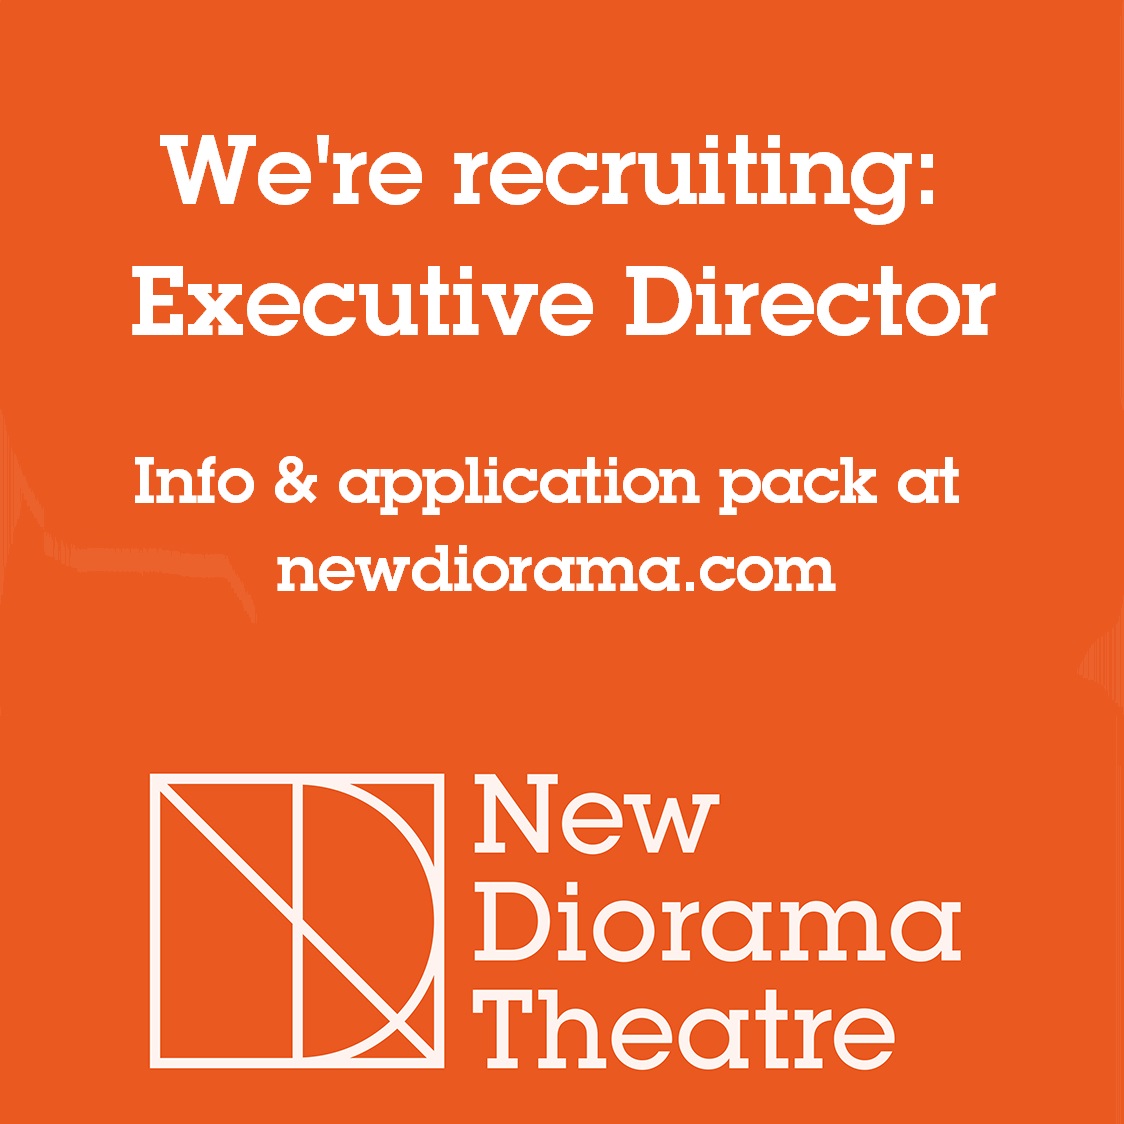 Want to be our next Executive Director? NDT is now recruiting for someone to help set the vision & agenda for our next steps - leading the UK's most influential studio theatre. Pack & application info newdiorama.com/contact-us/job…